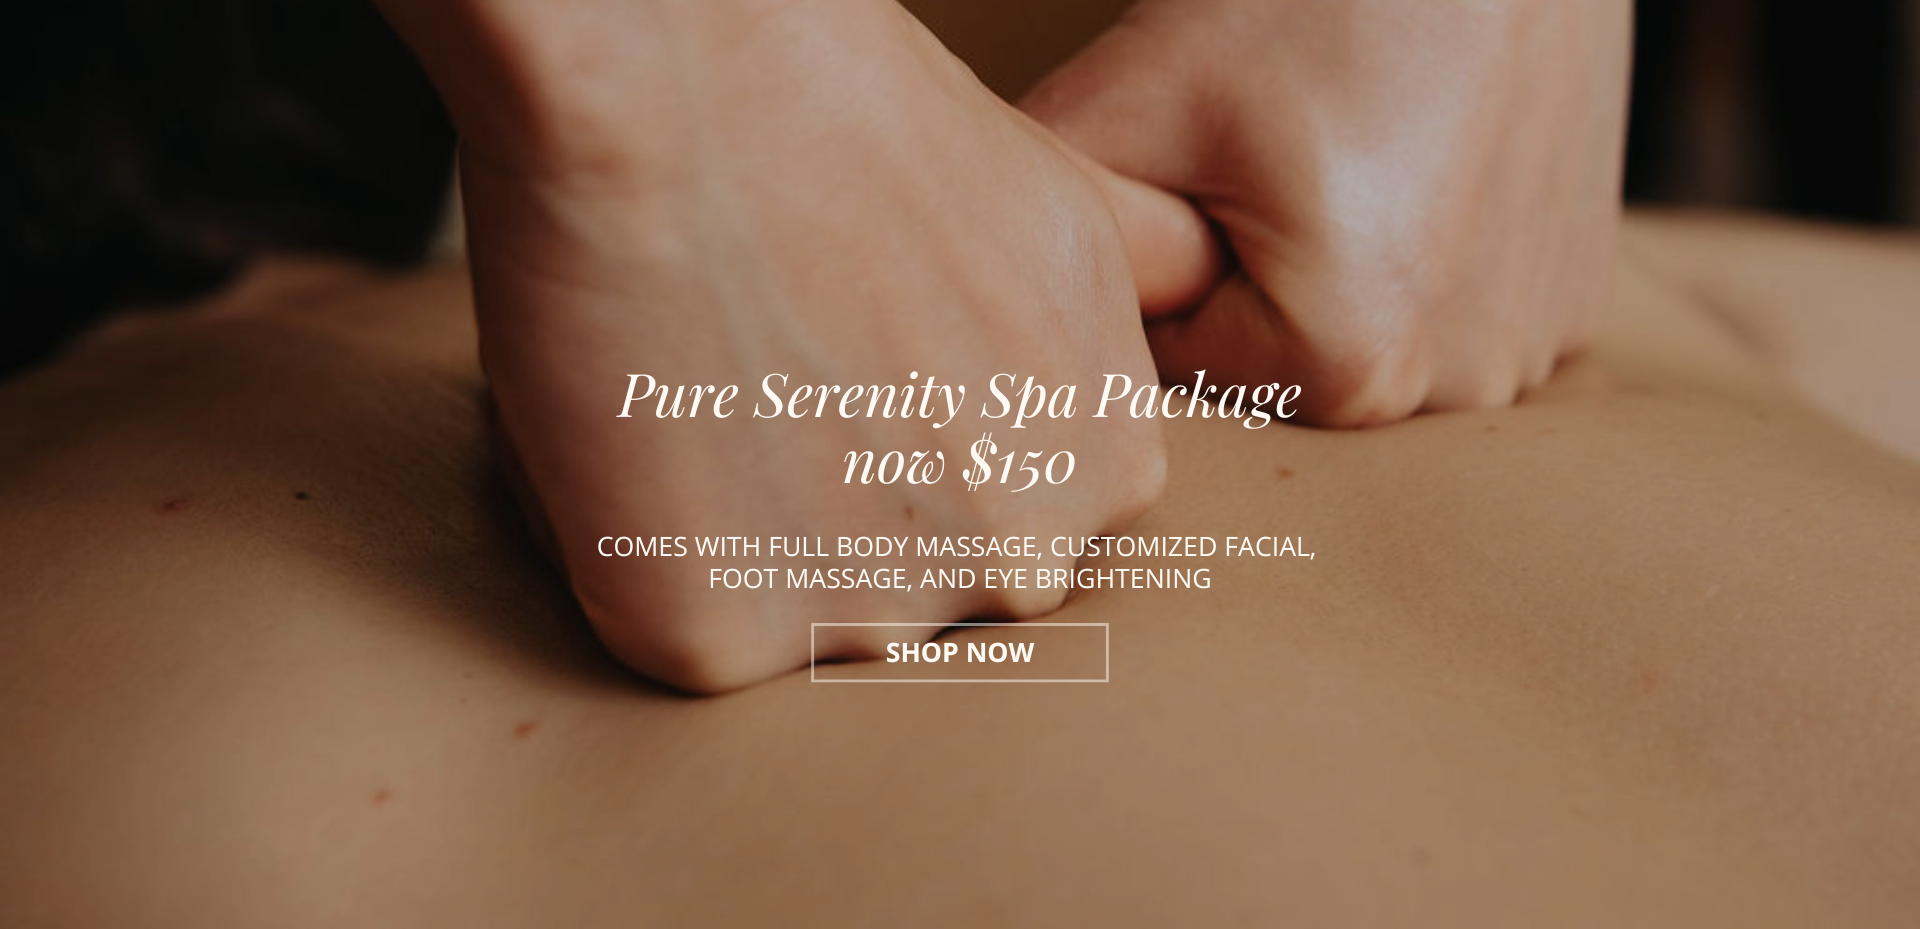 Pure Serenity Spa package